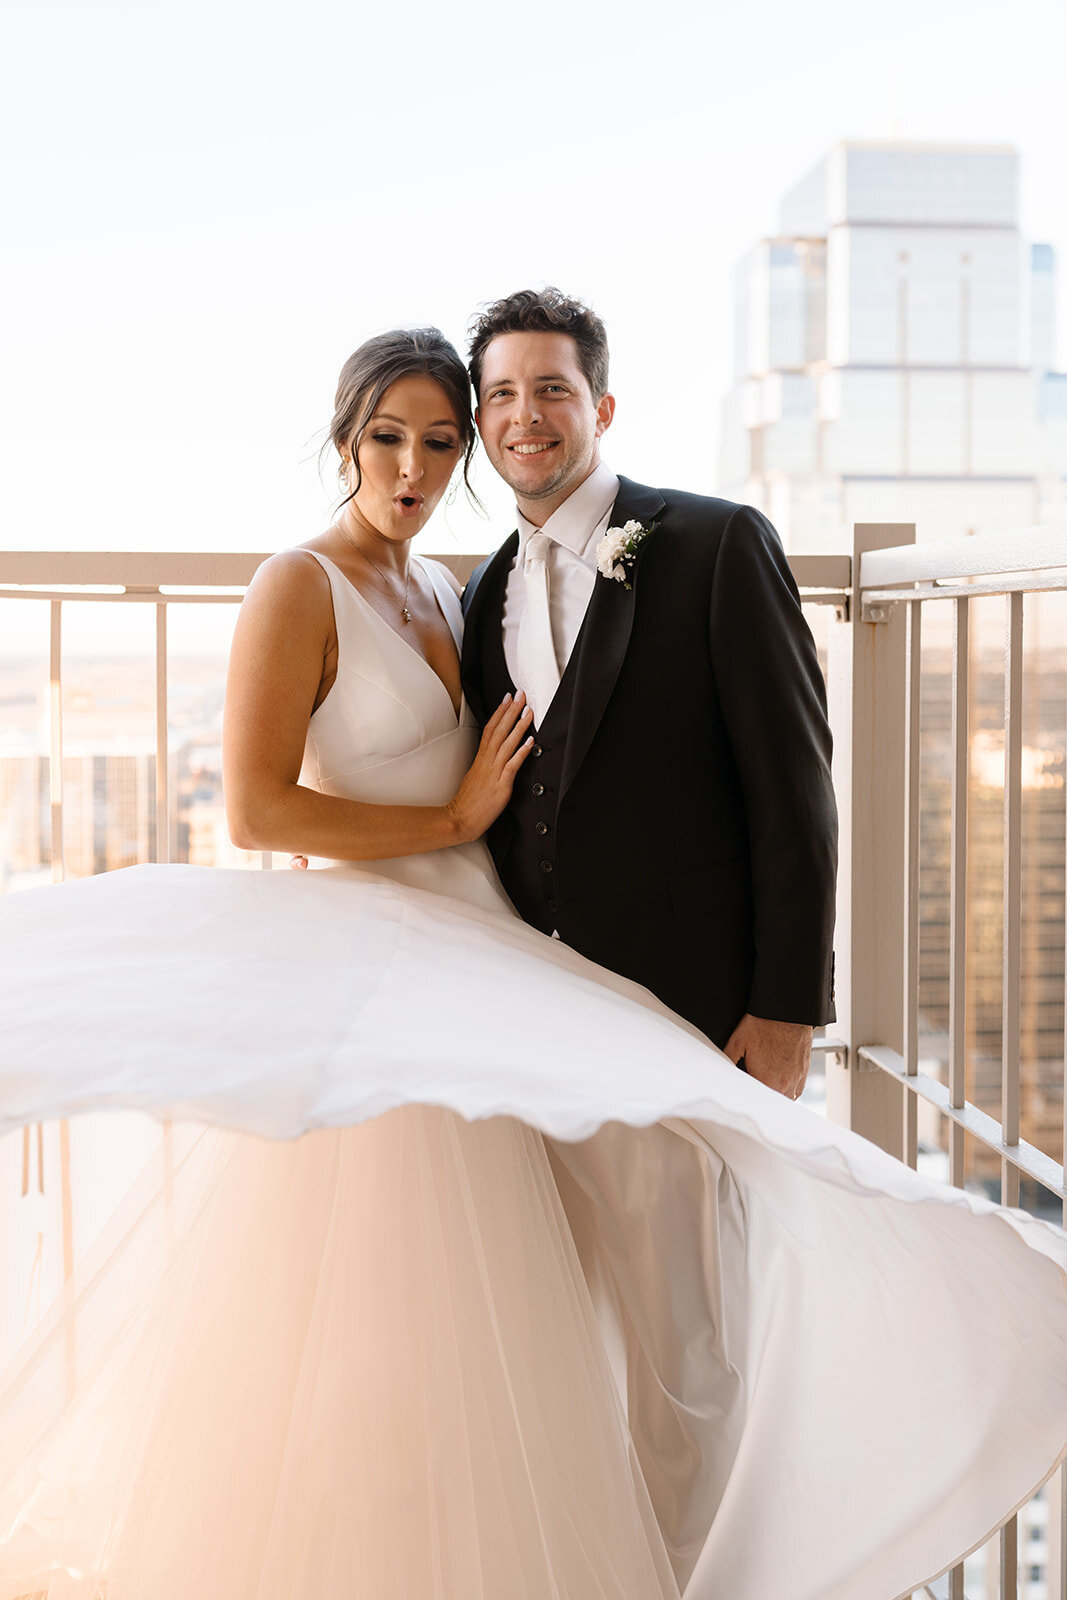 Kylie and Jack at The Grand Hall - Kansas City Wedding Photograpy - Nick and Lexie Photo Film-754